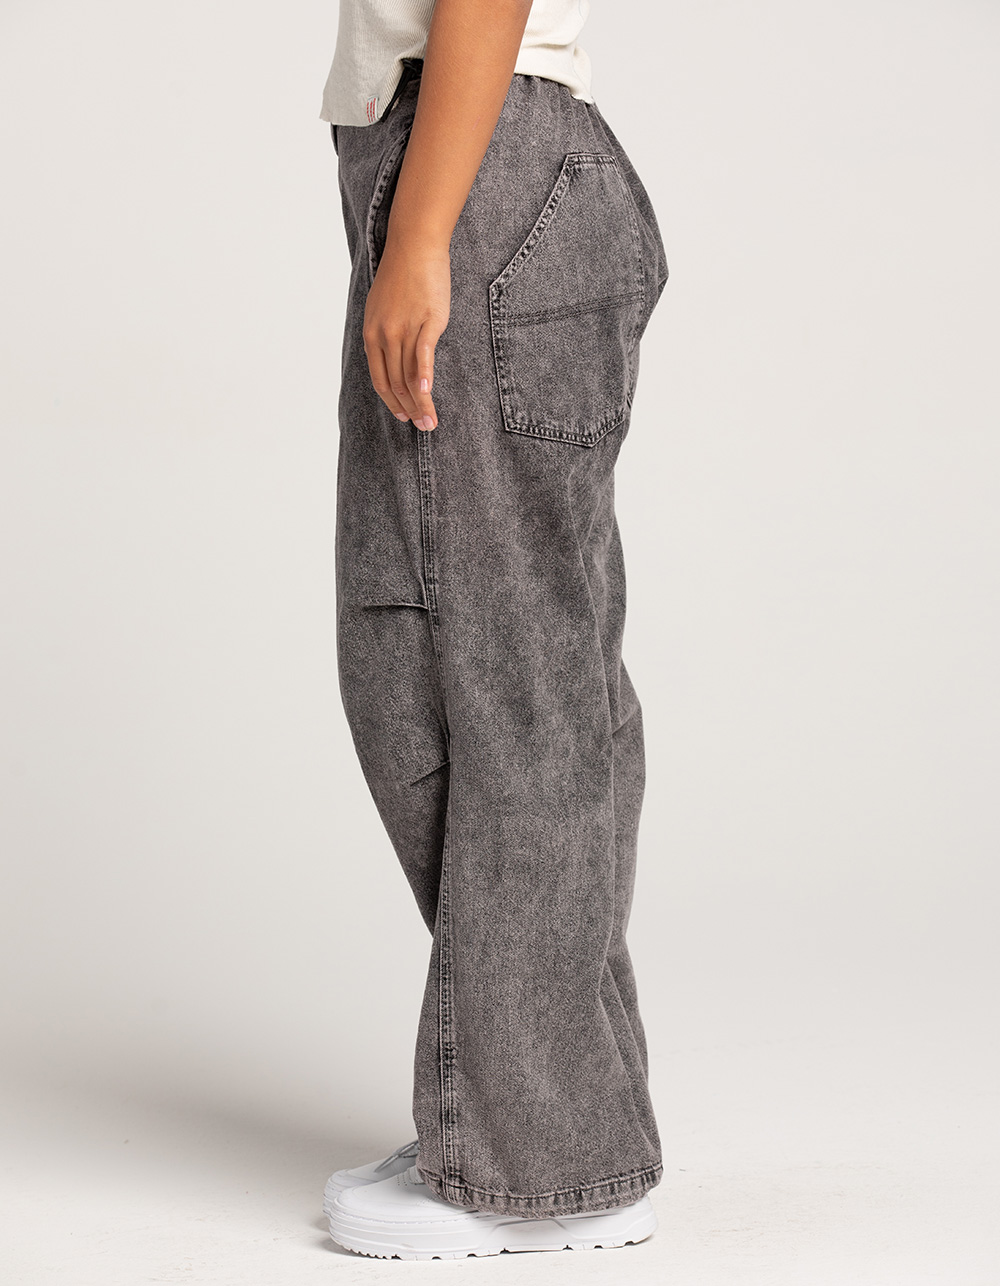 BDG Urban Outfitters Baggy Tech Pants - WASHED BLACK | Tillys